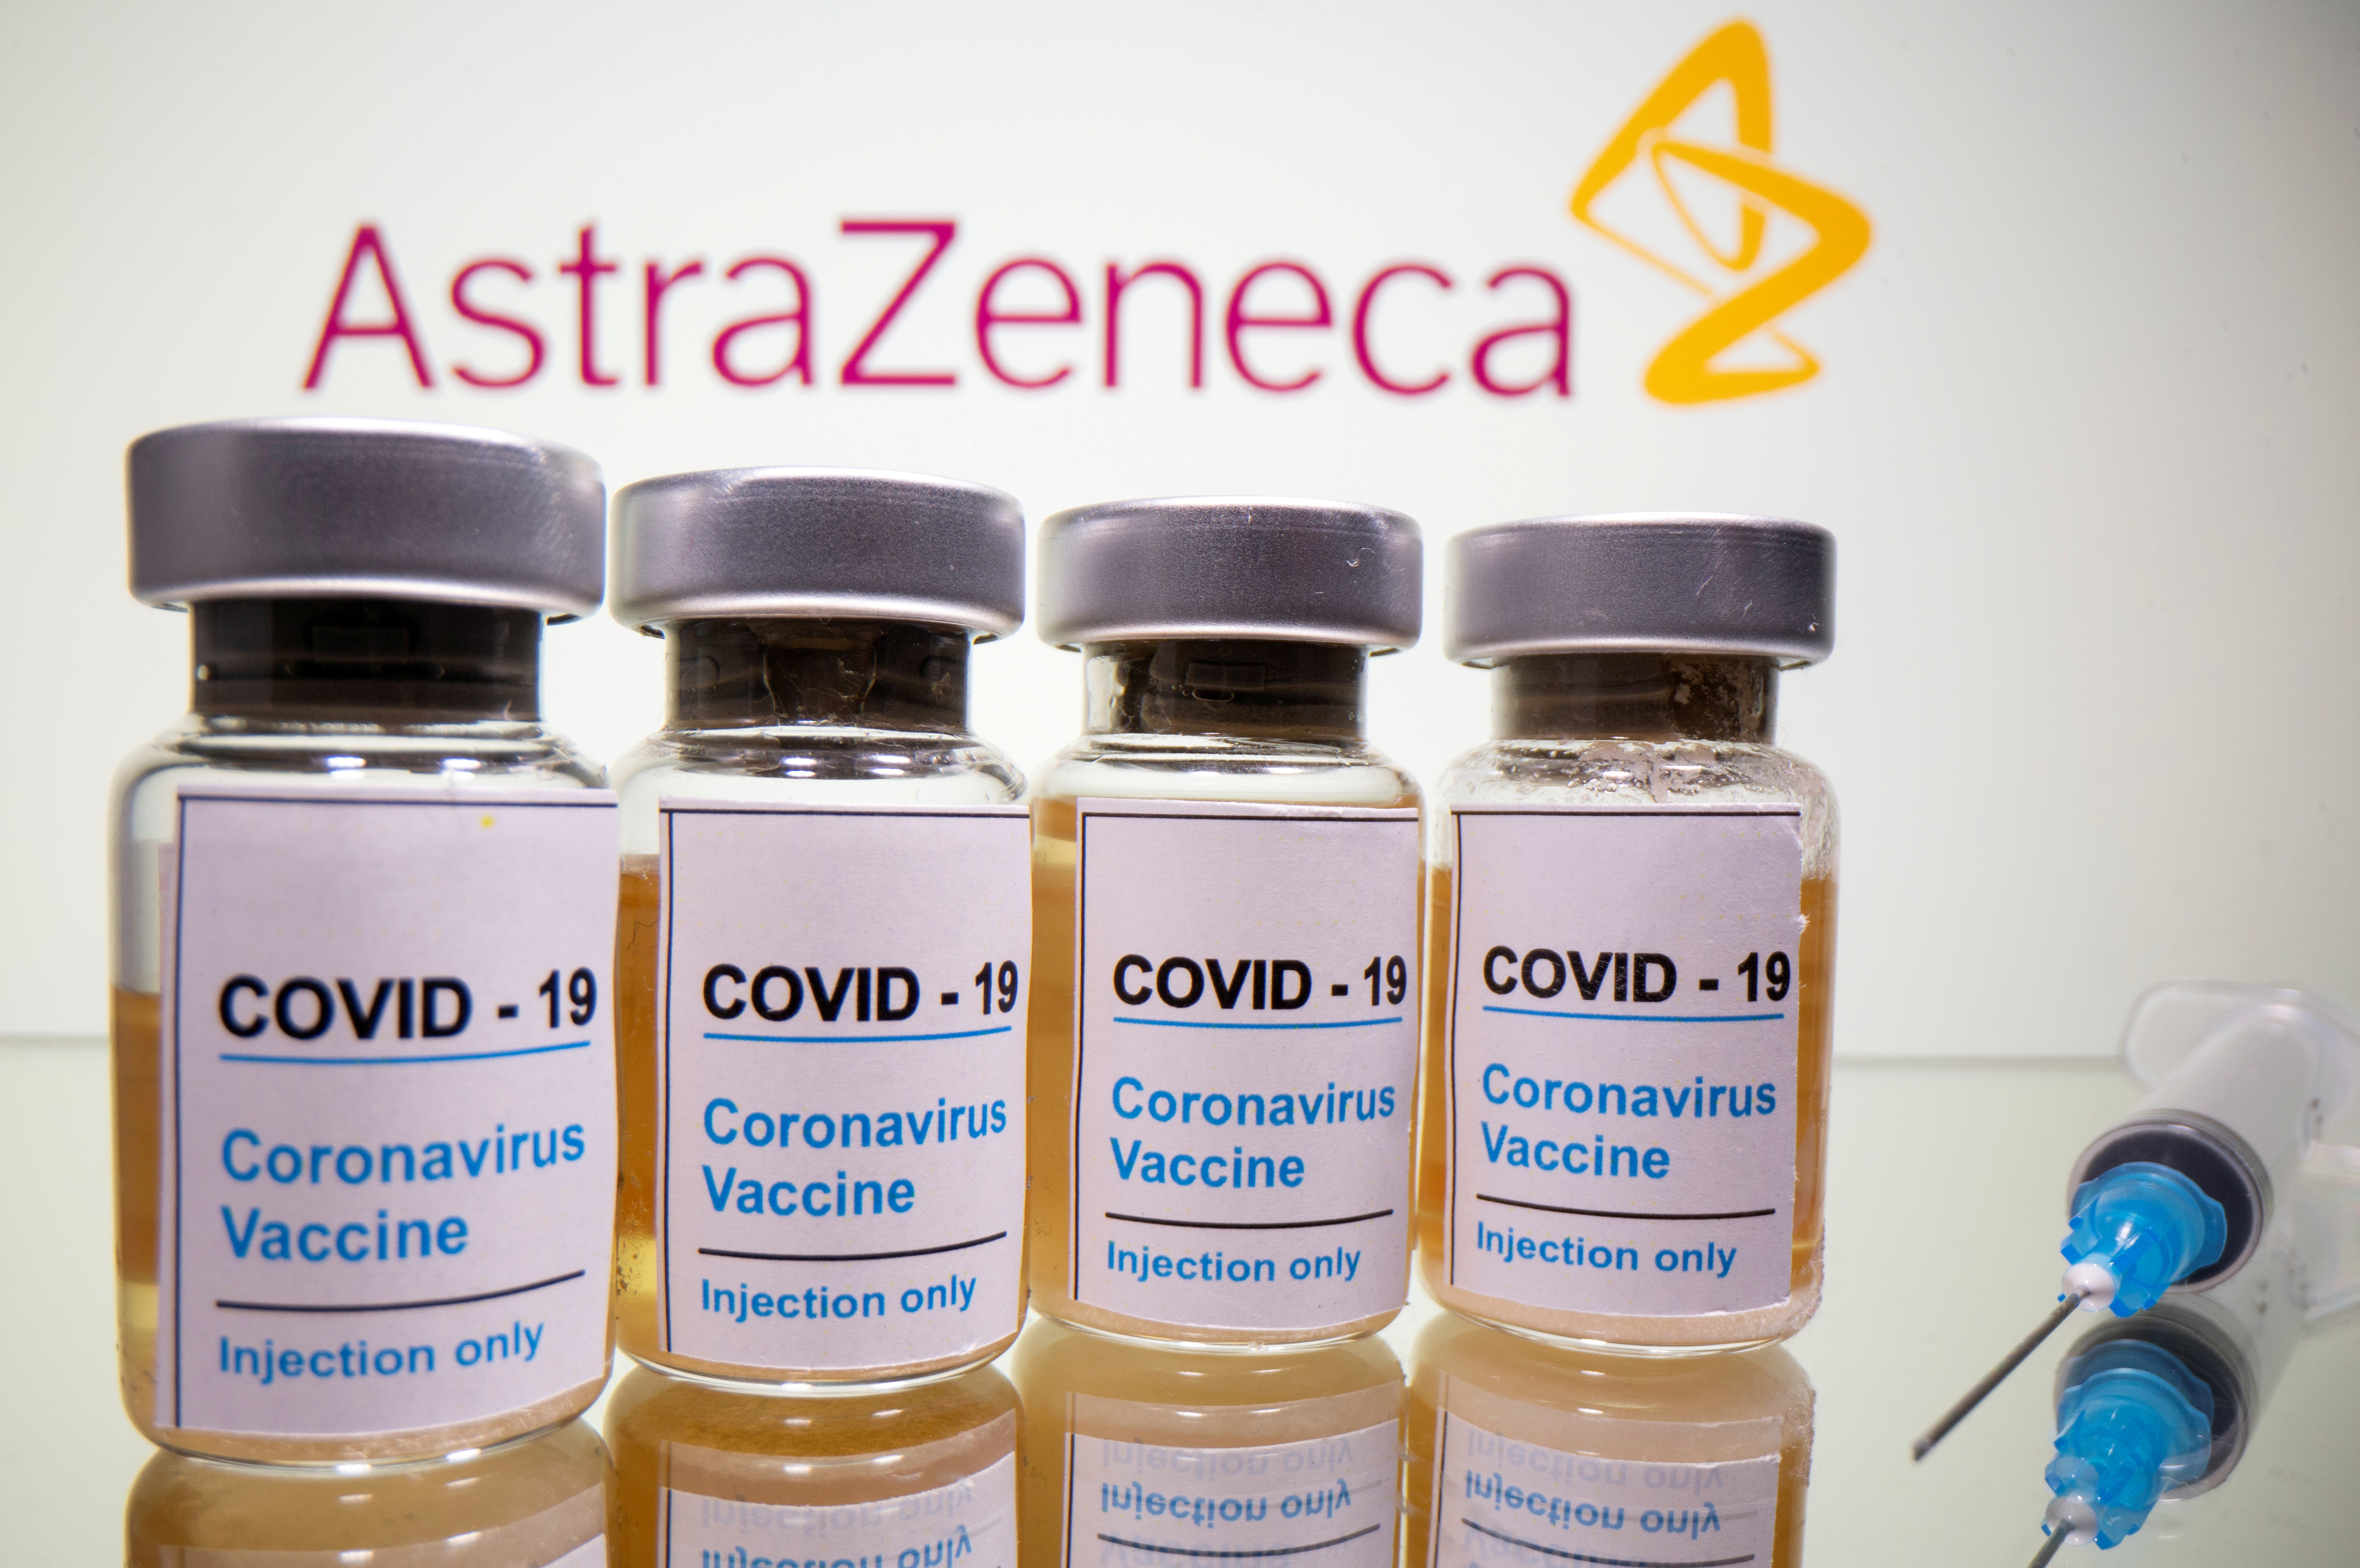 Vials and medical syringe are seen in front of AstraZeneca logo in this illustration